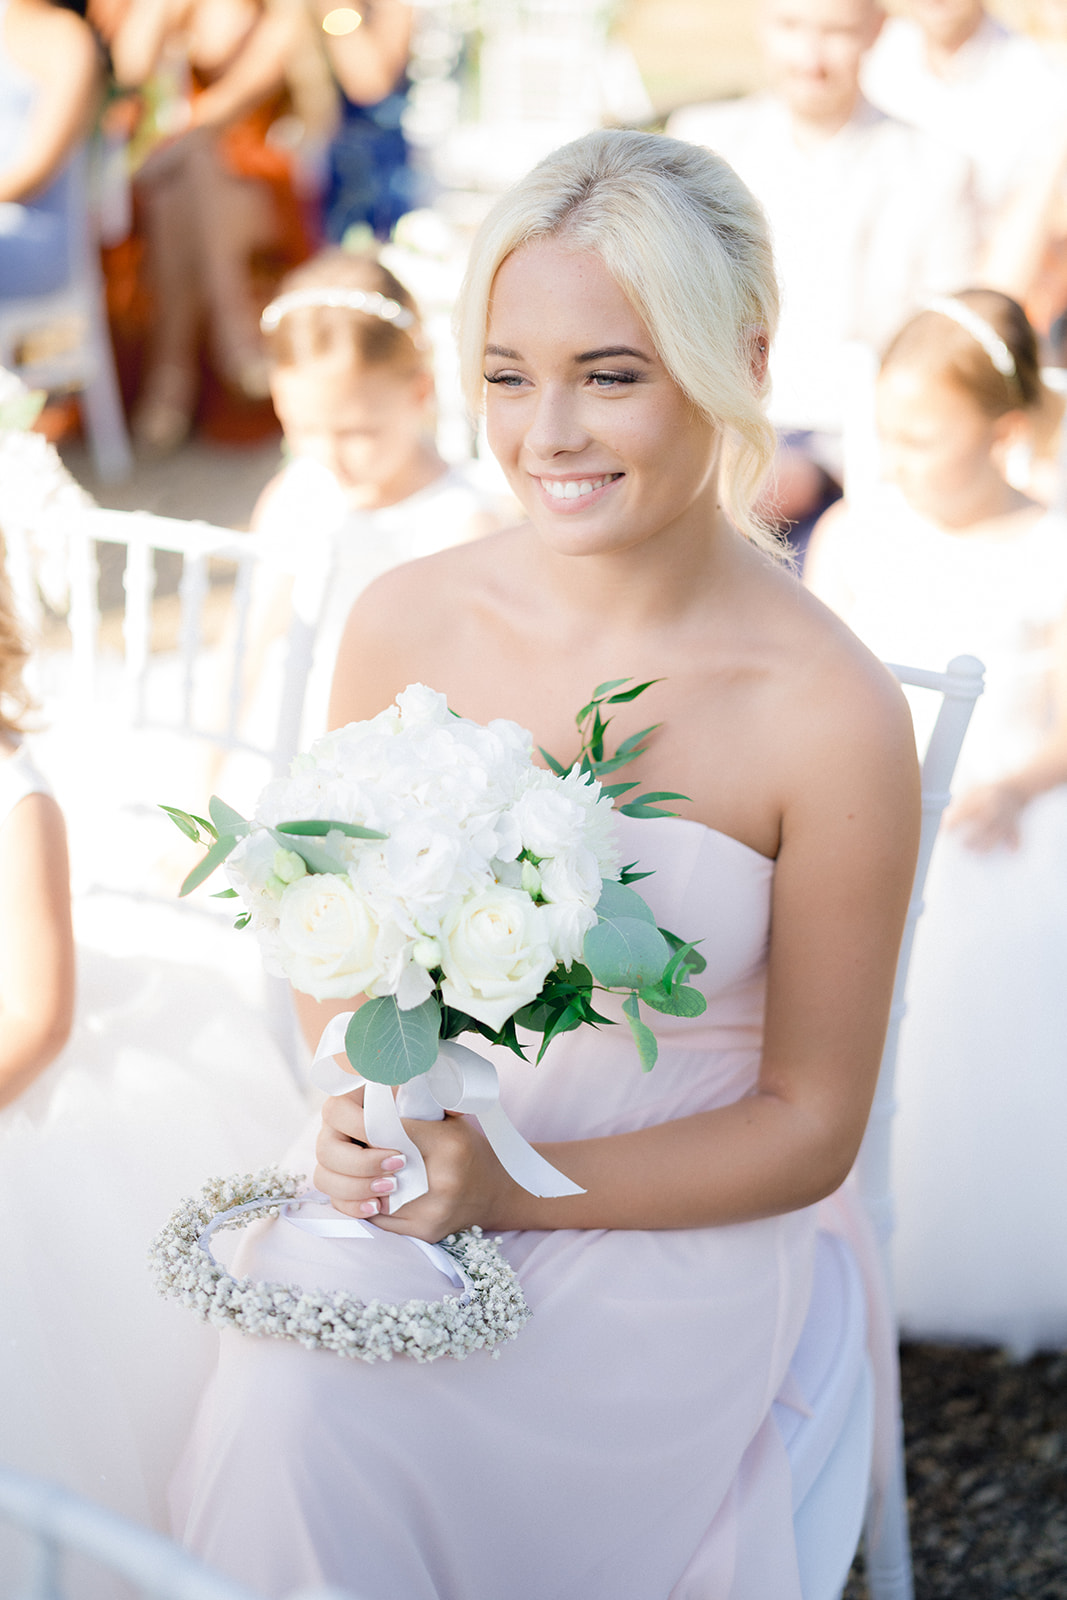 the sister of the groom in a pastel pink dress holding a bouquet of flowers